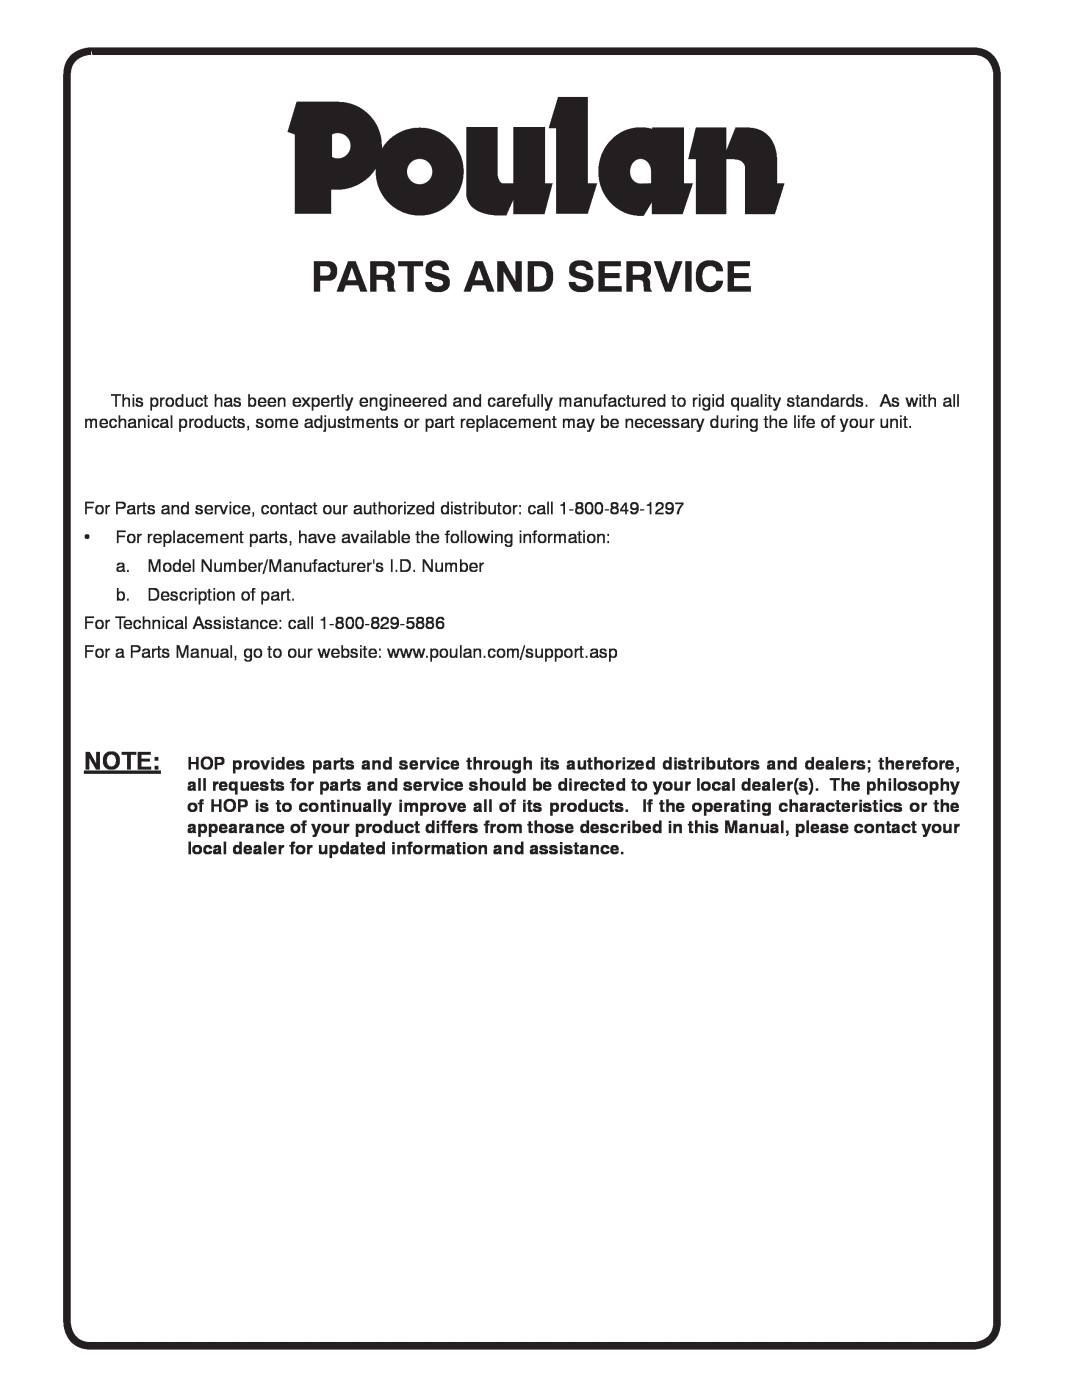 Poulan 413157, 96082000700 manual Parts And Service 